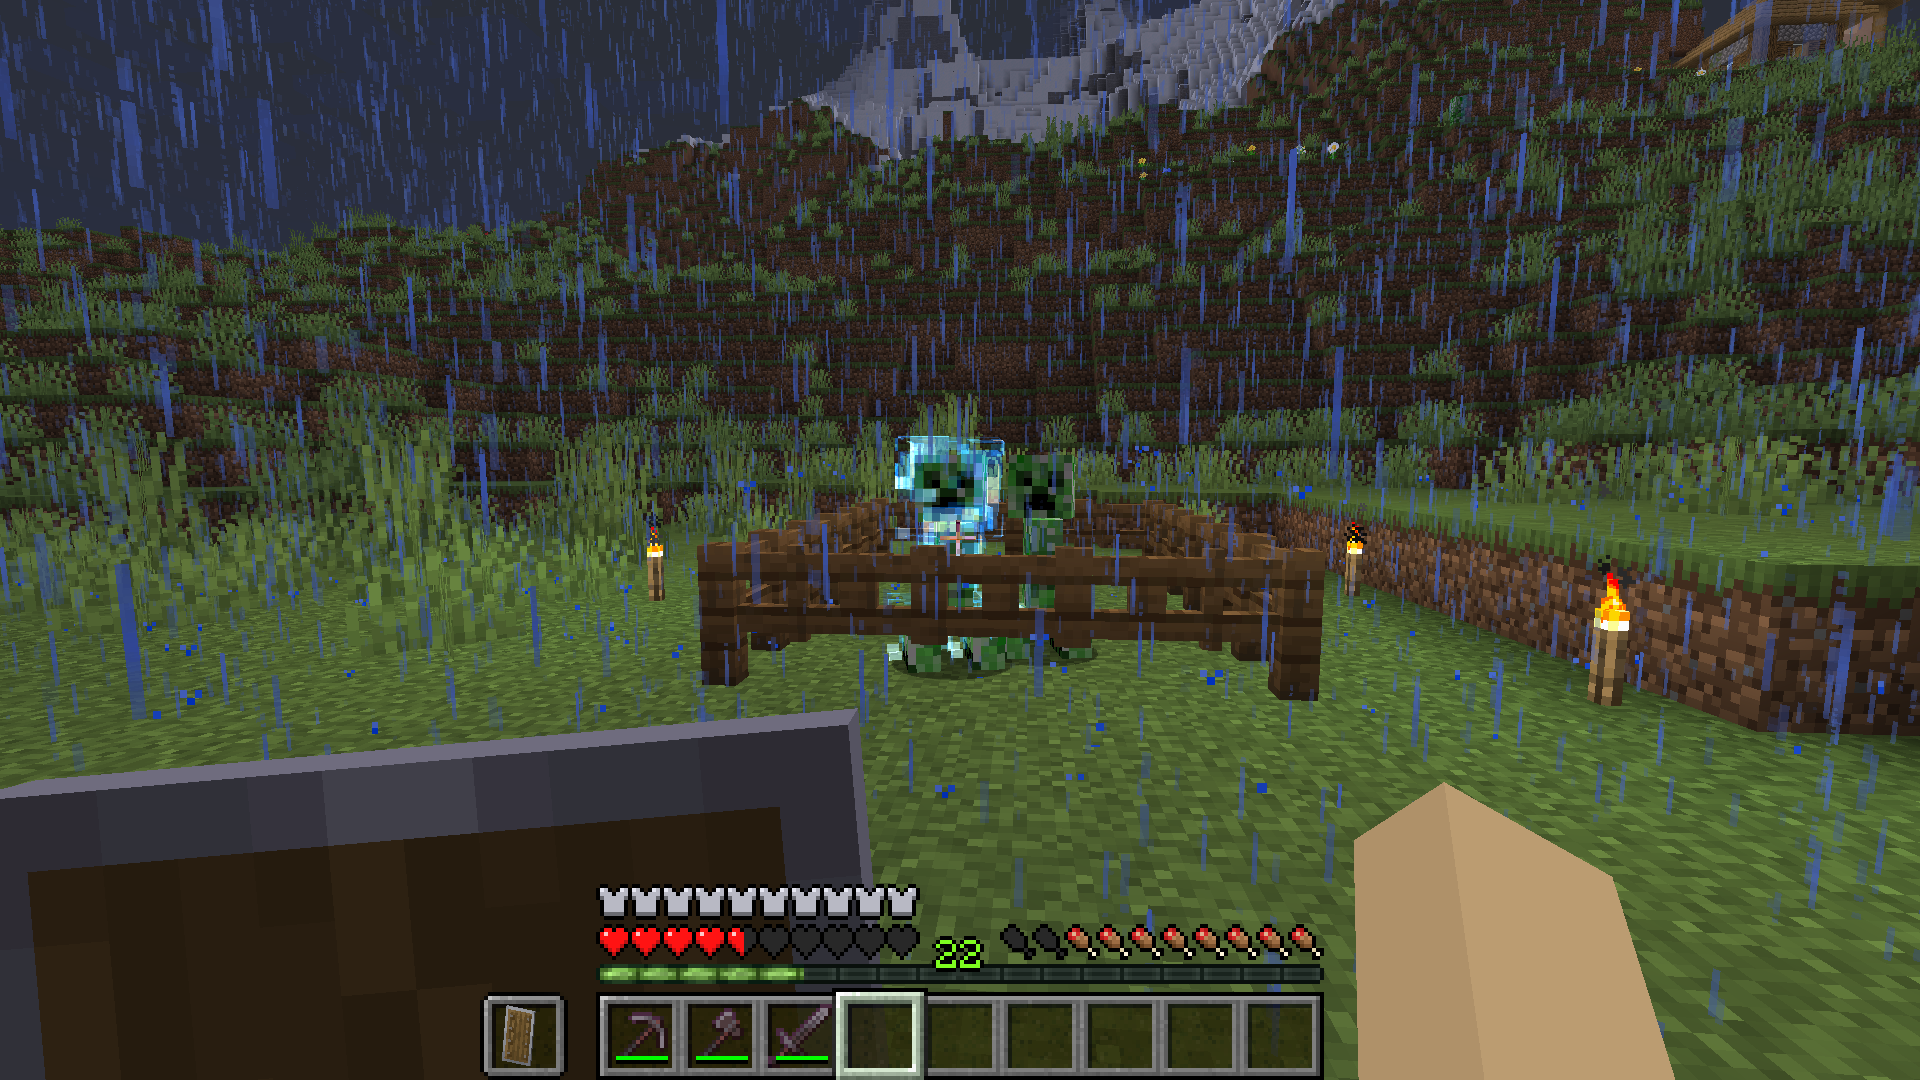 Image of a Charged Creeper and a normal Creeper fenced in.